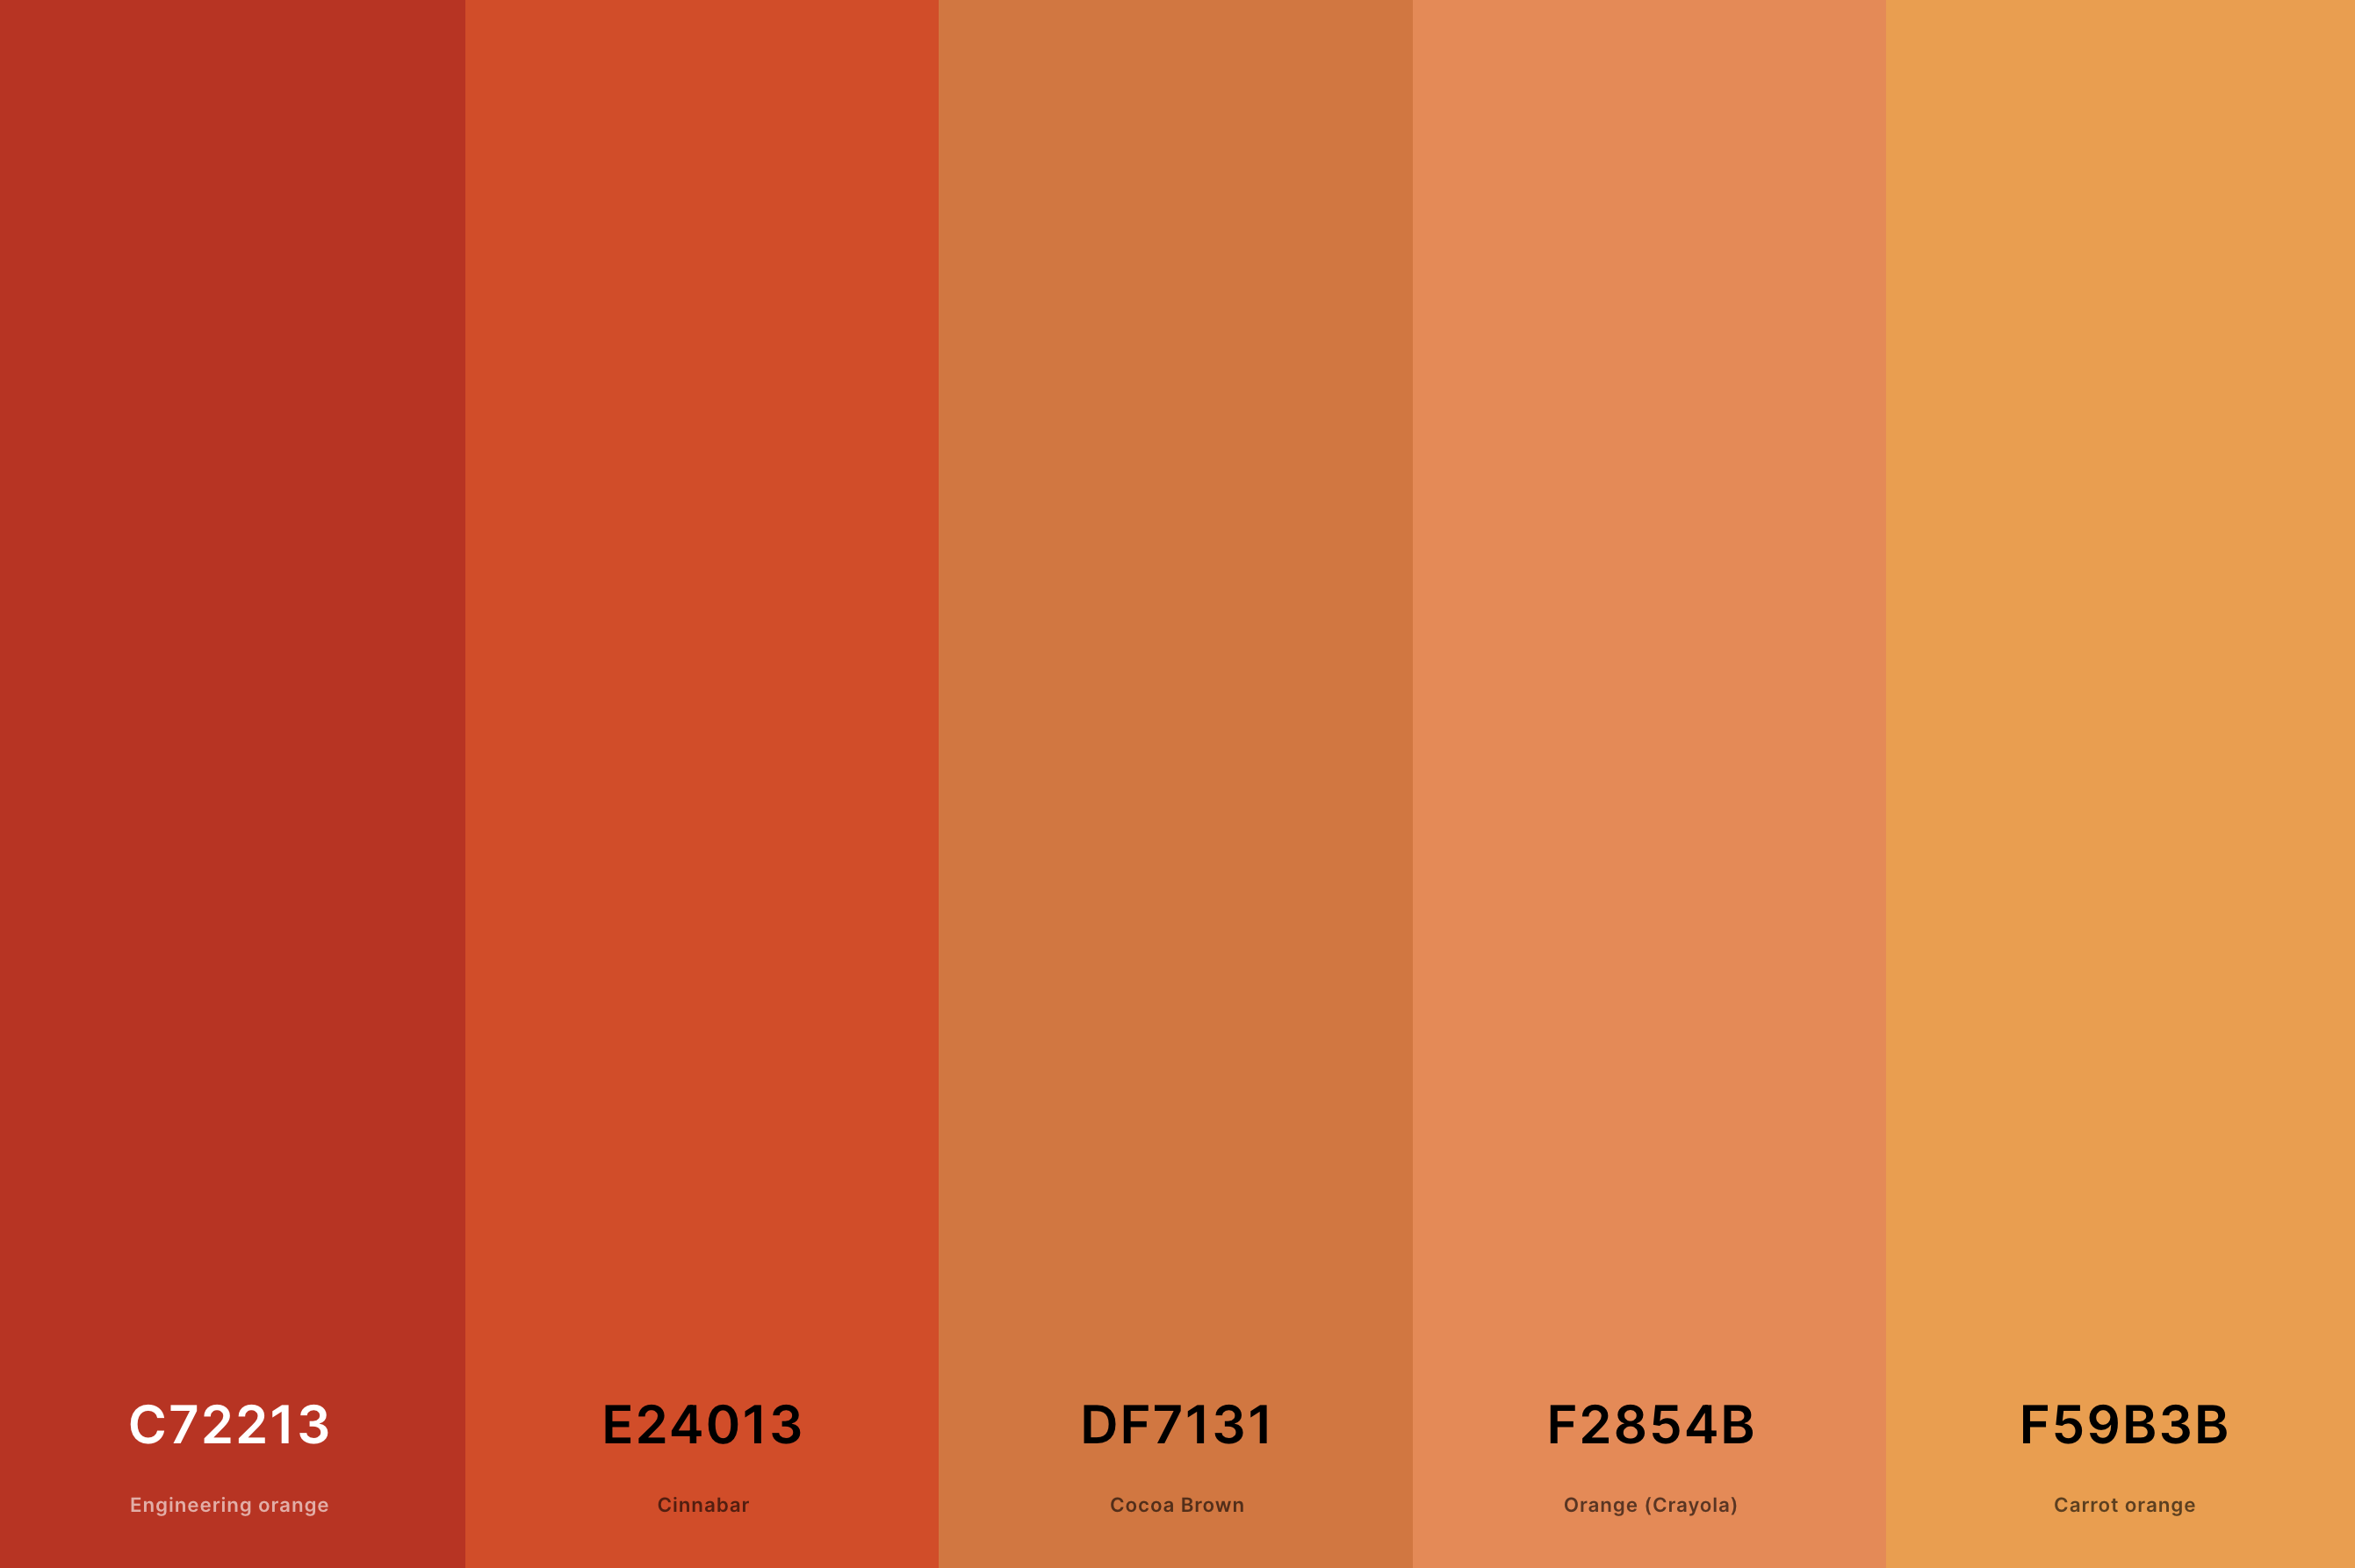 20. Bright Terracotta Color Palette Color Palette with Engineering Orange (Hex #C72213) + Cinnabar (Hex #E24013) + Cocoa Brown (Hex #DF7131) + Orange (Crayola) (Hex #F2854B) + Carrot Orange (Hex #F59B3B) Color Palette with Hex Codes